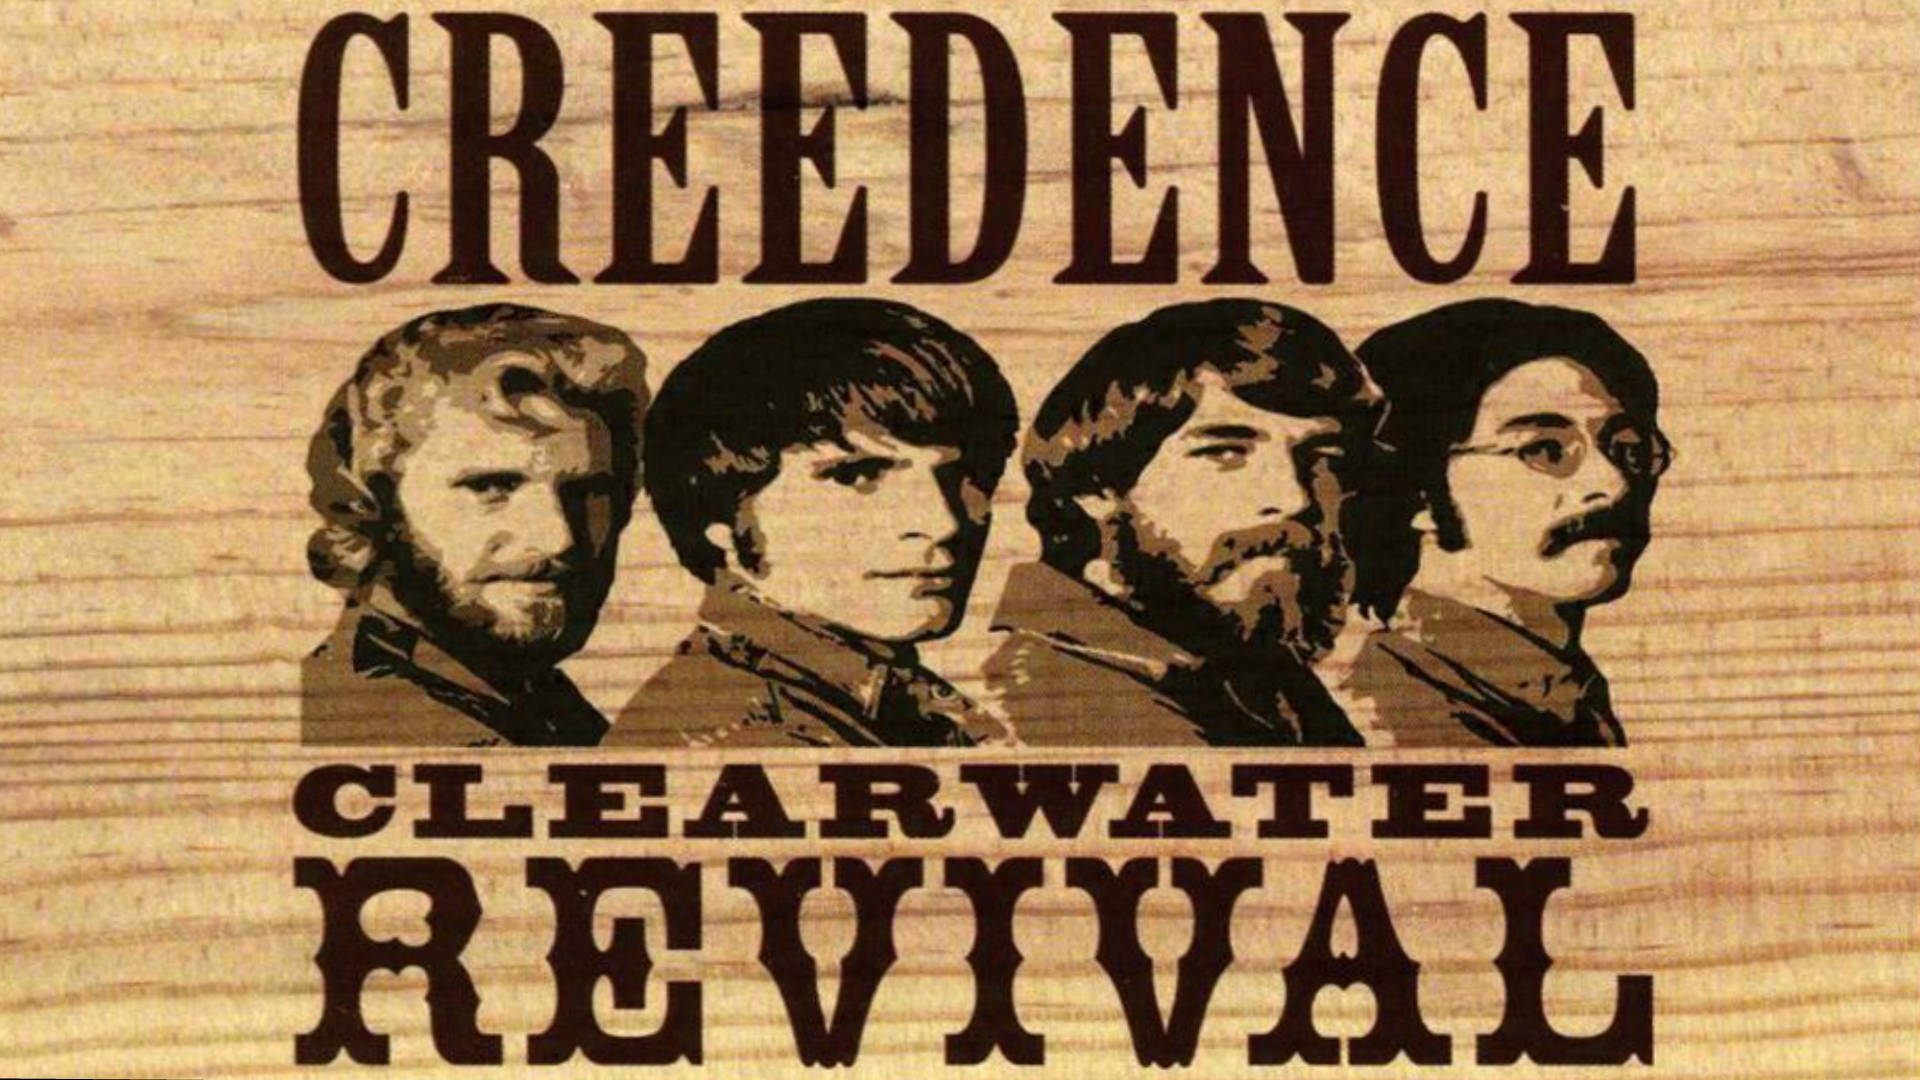 Best Creedence Clearwater Revival Wallpaper